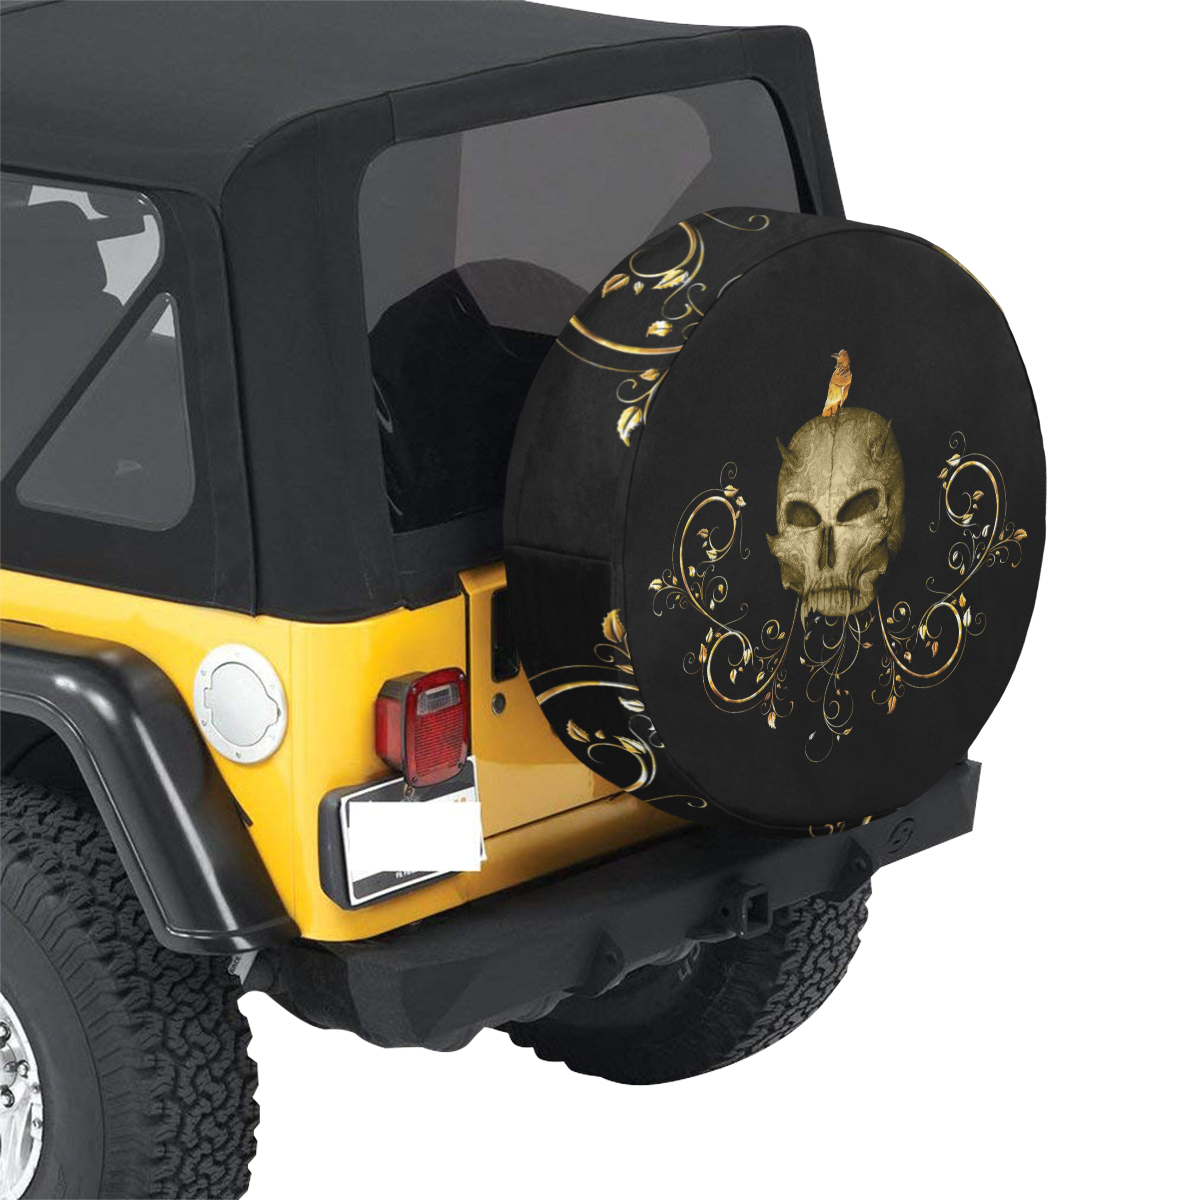 The golden skull 32 Inch Spare Tire Cover